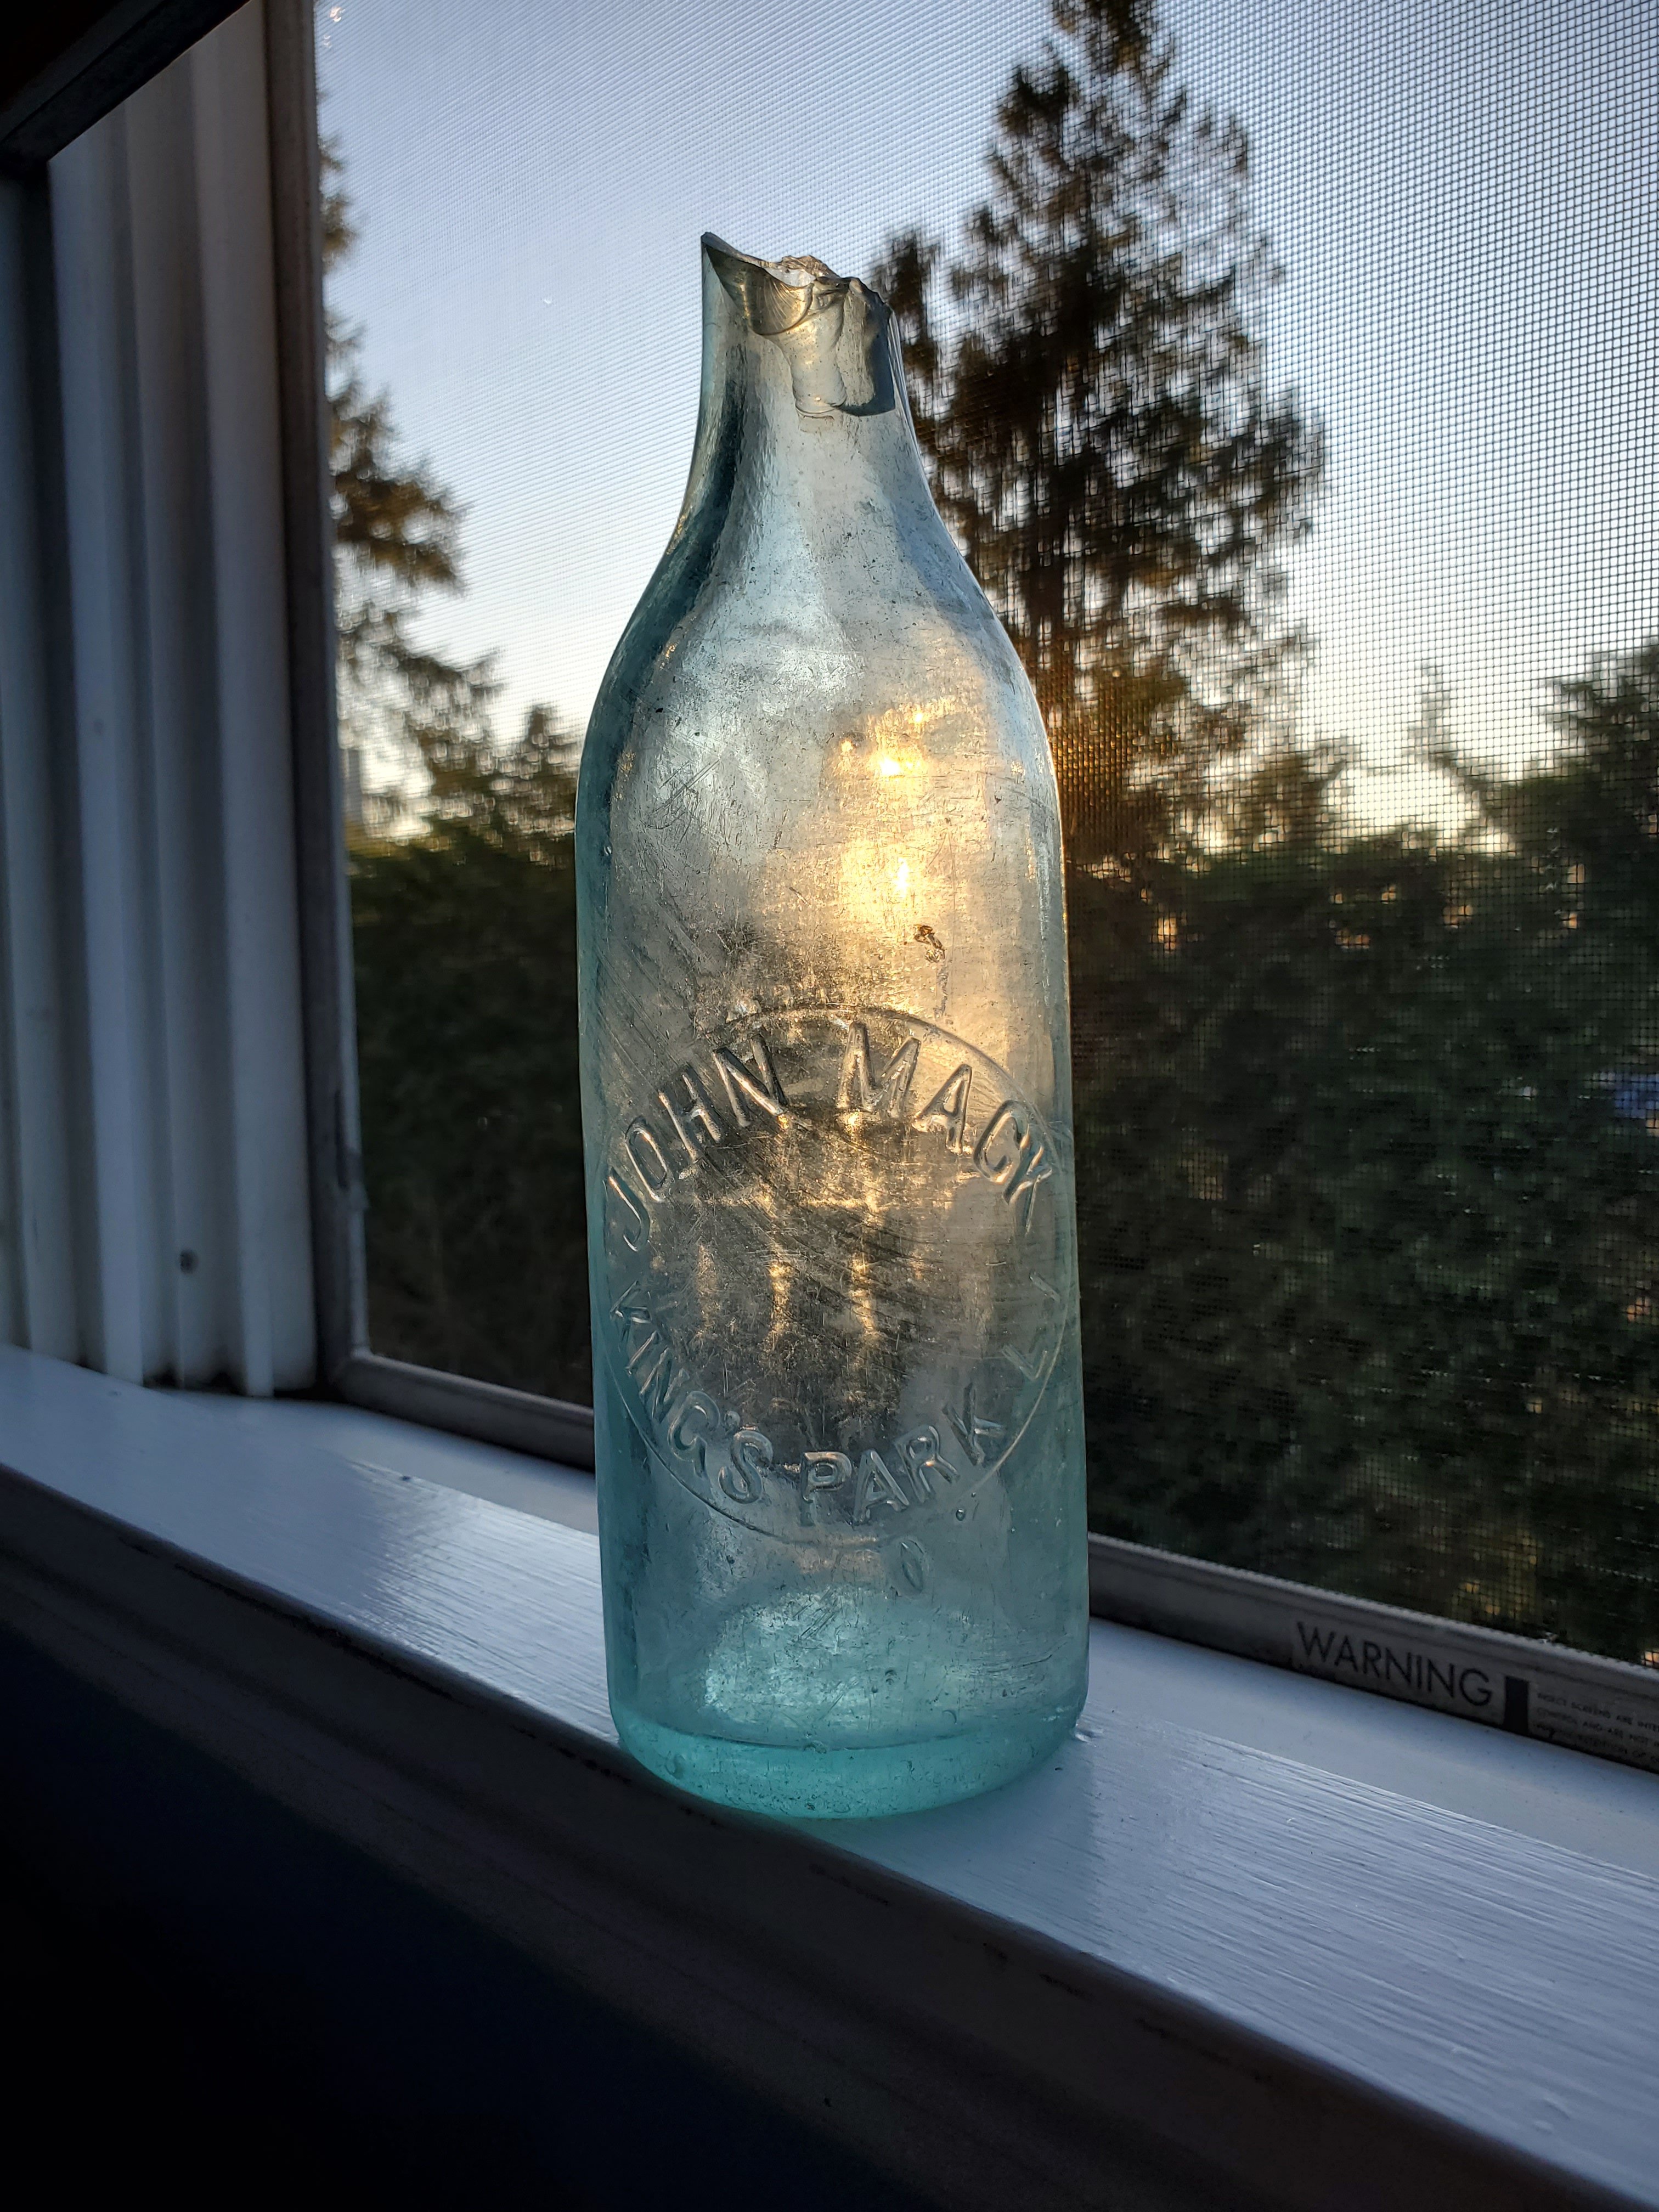 What is the most valuable bottle that you own or have sold